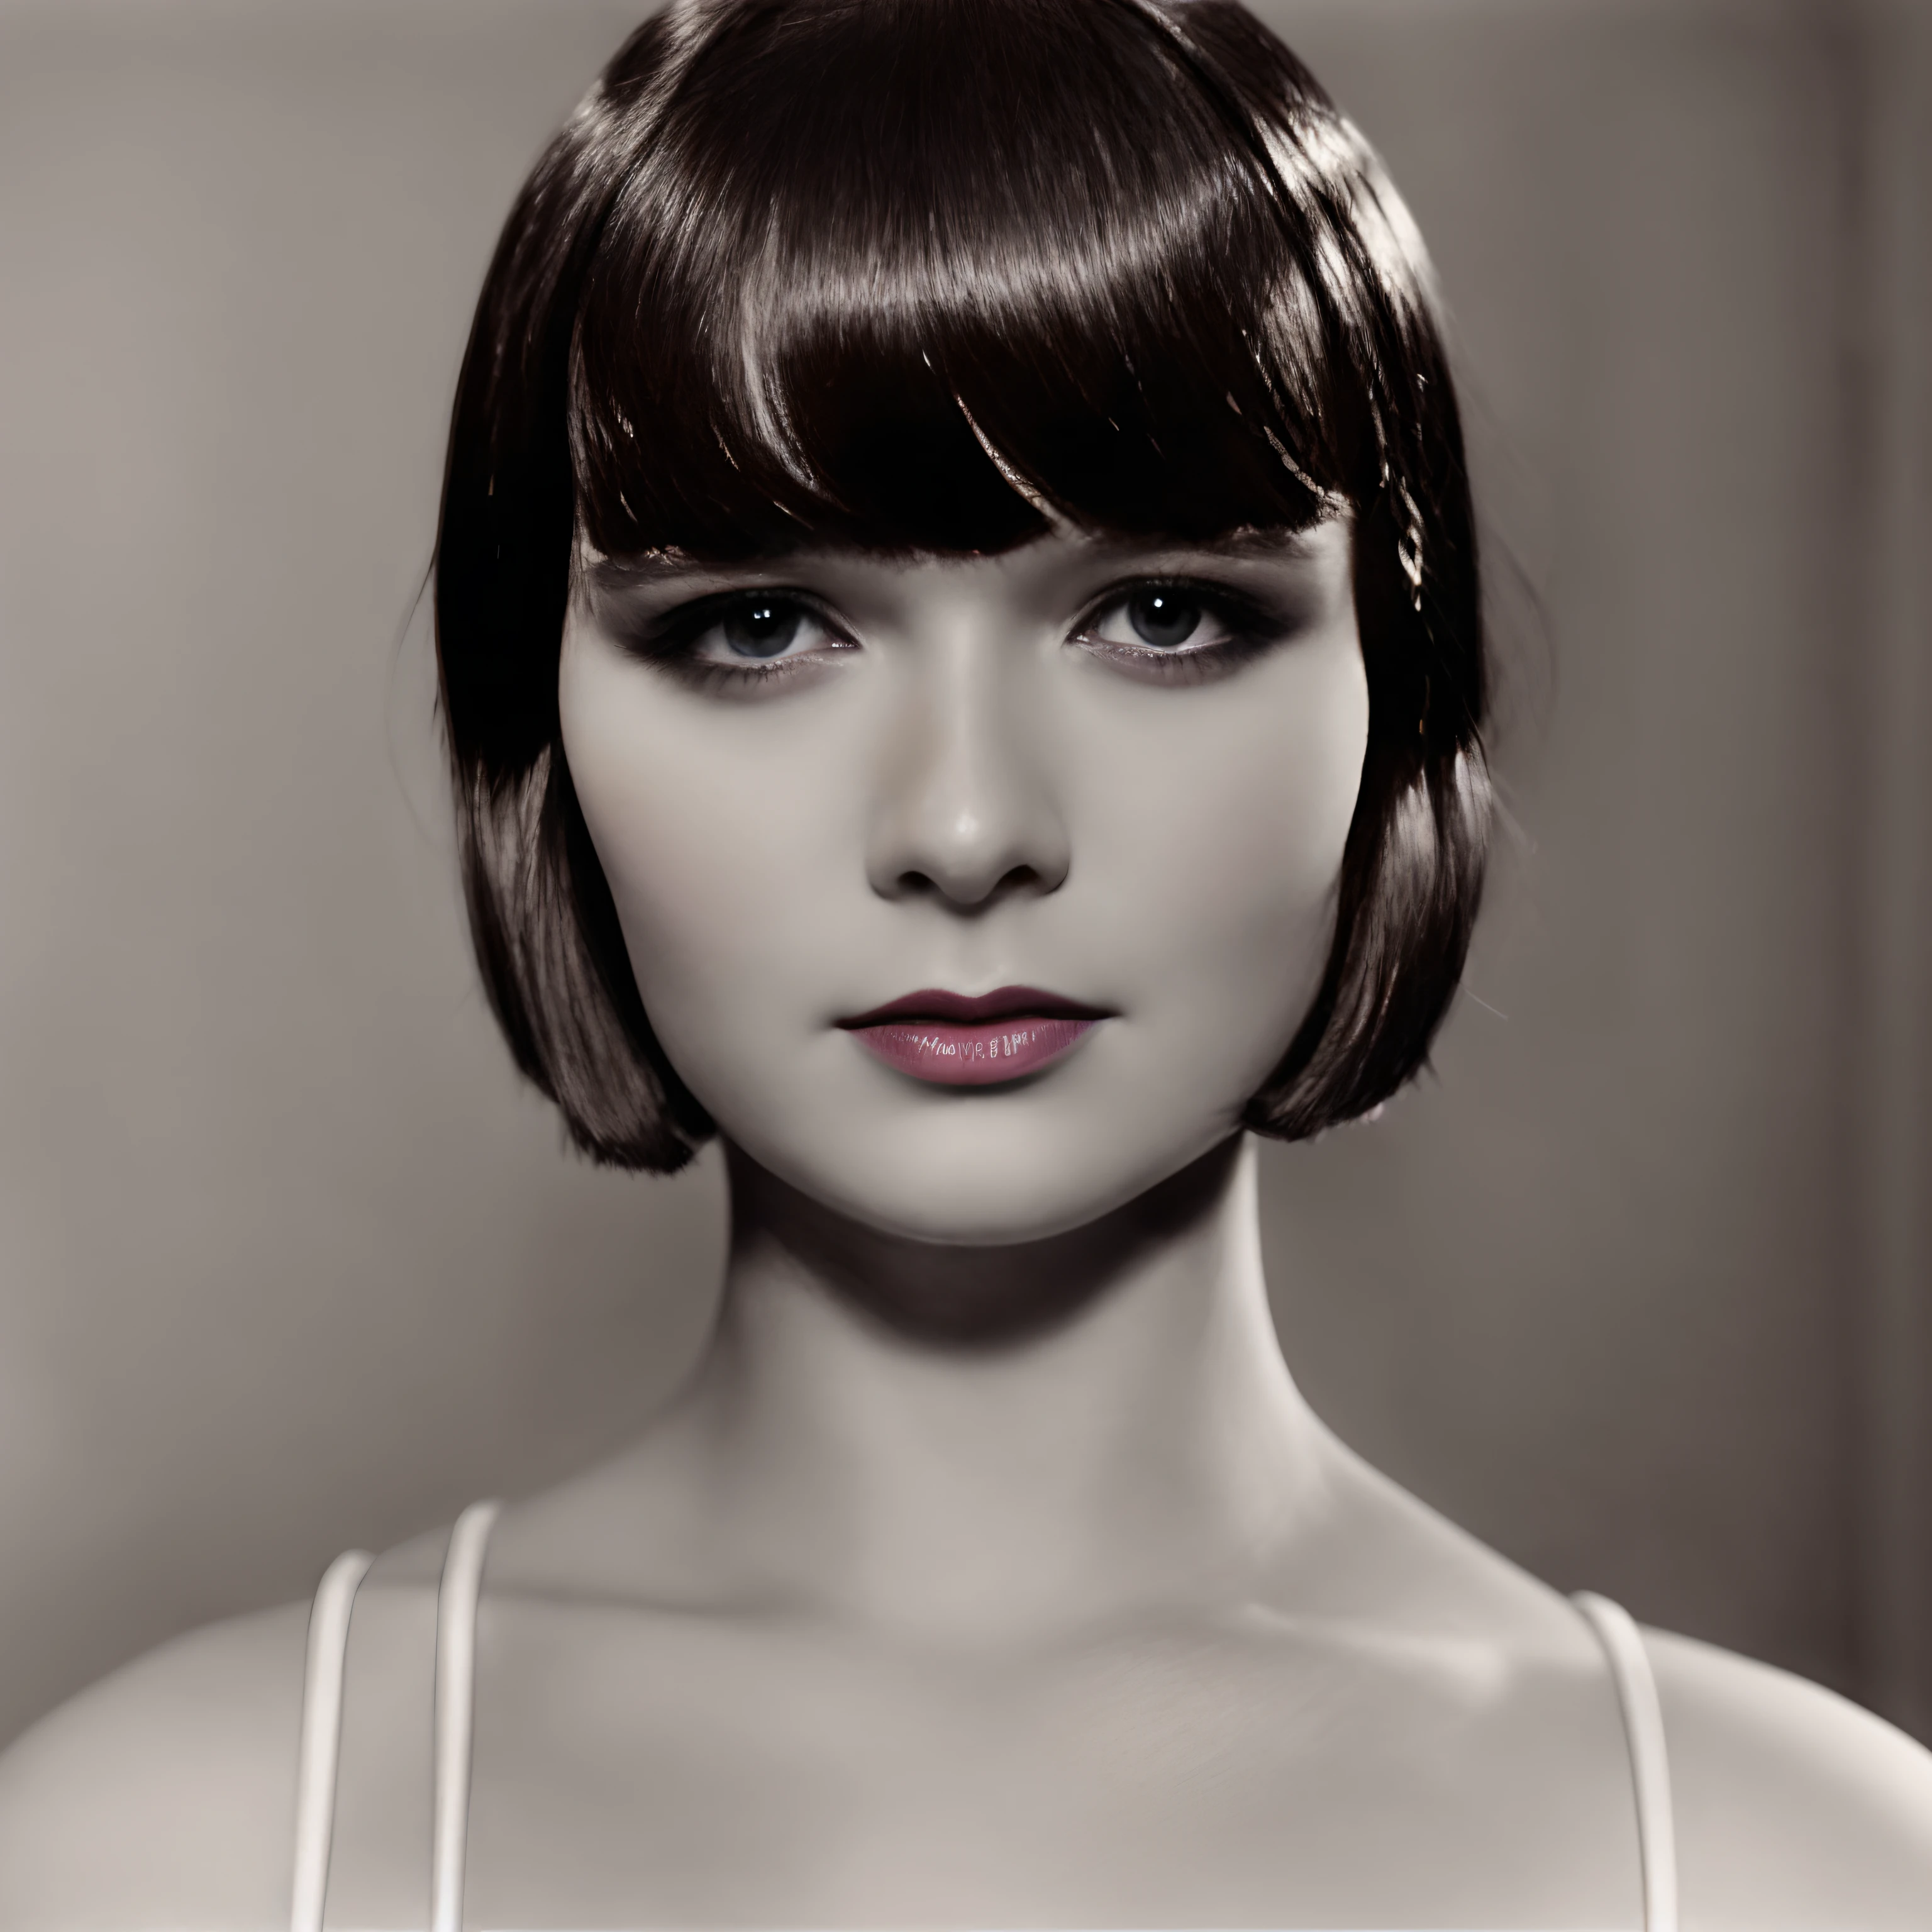 Louise Brooks image by Gigamesh